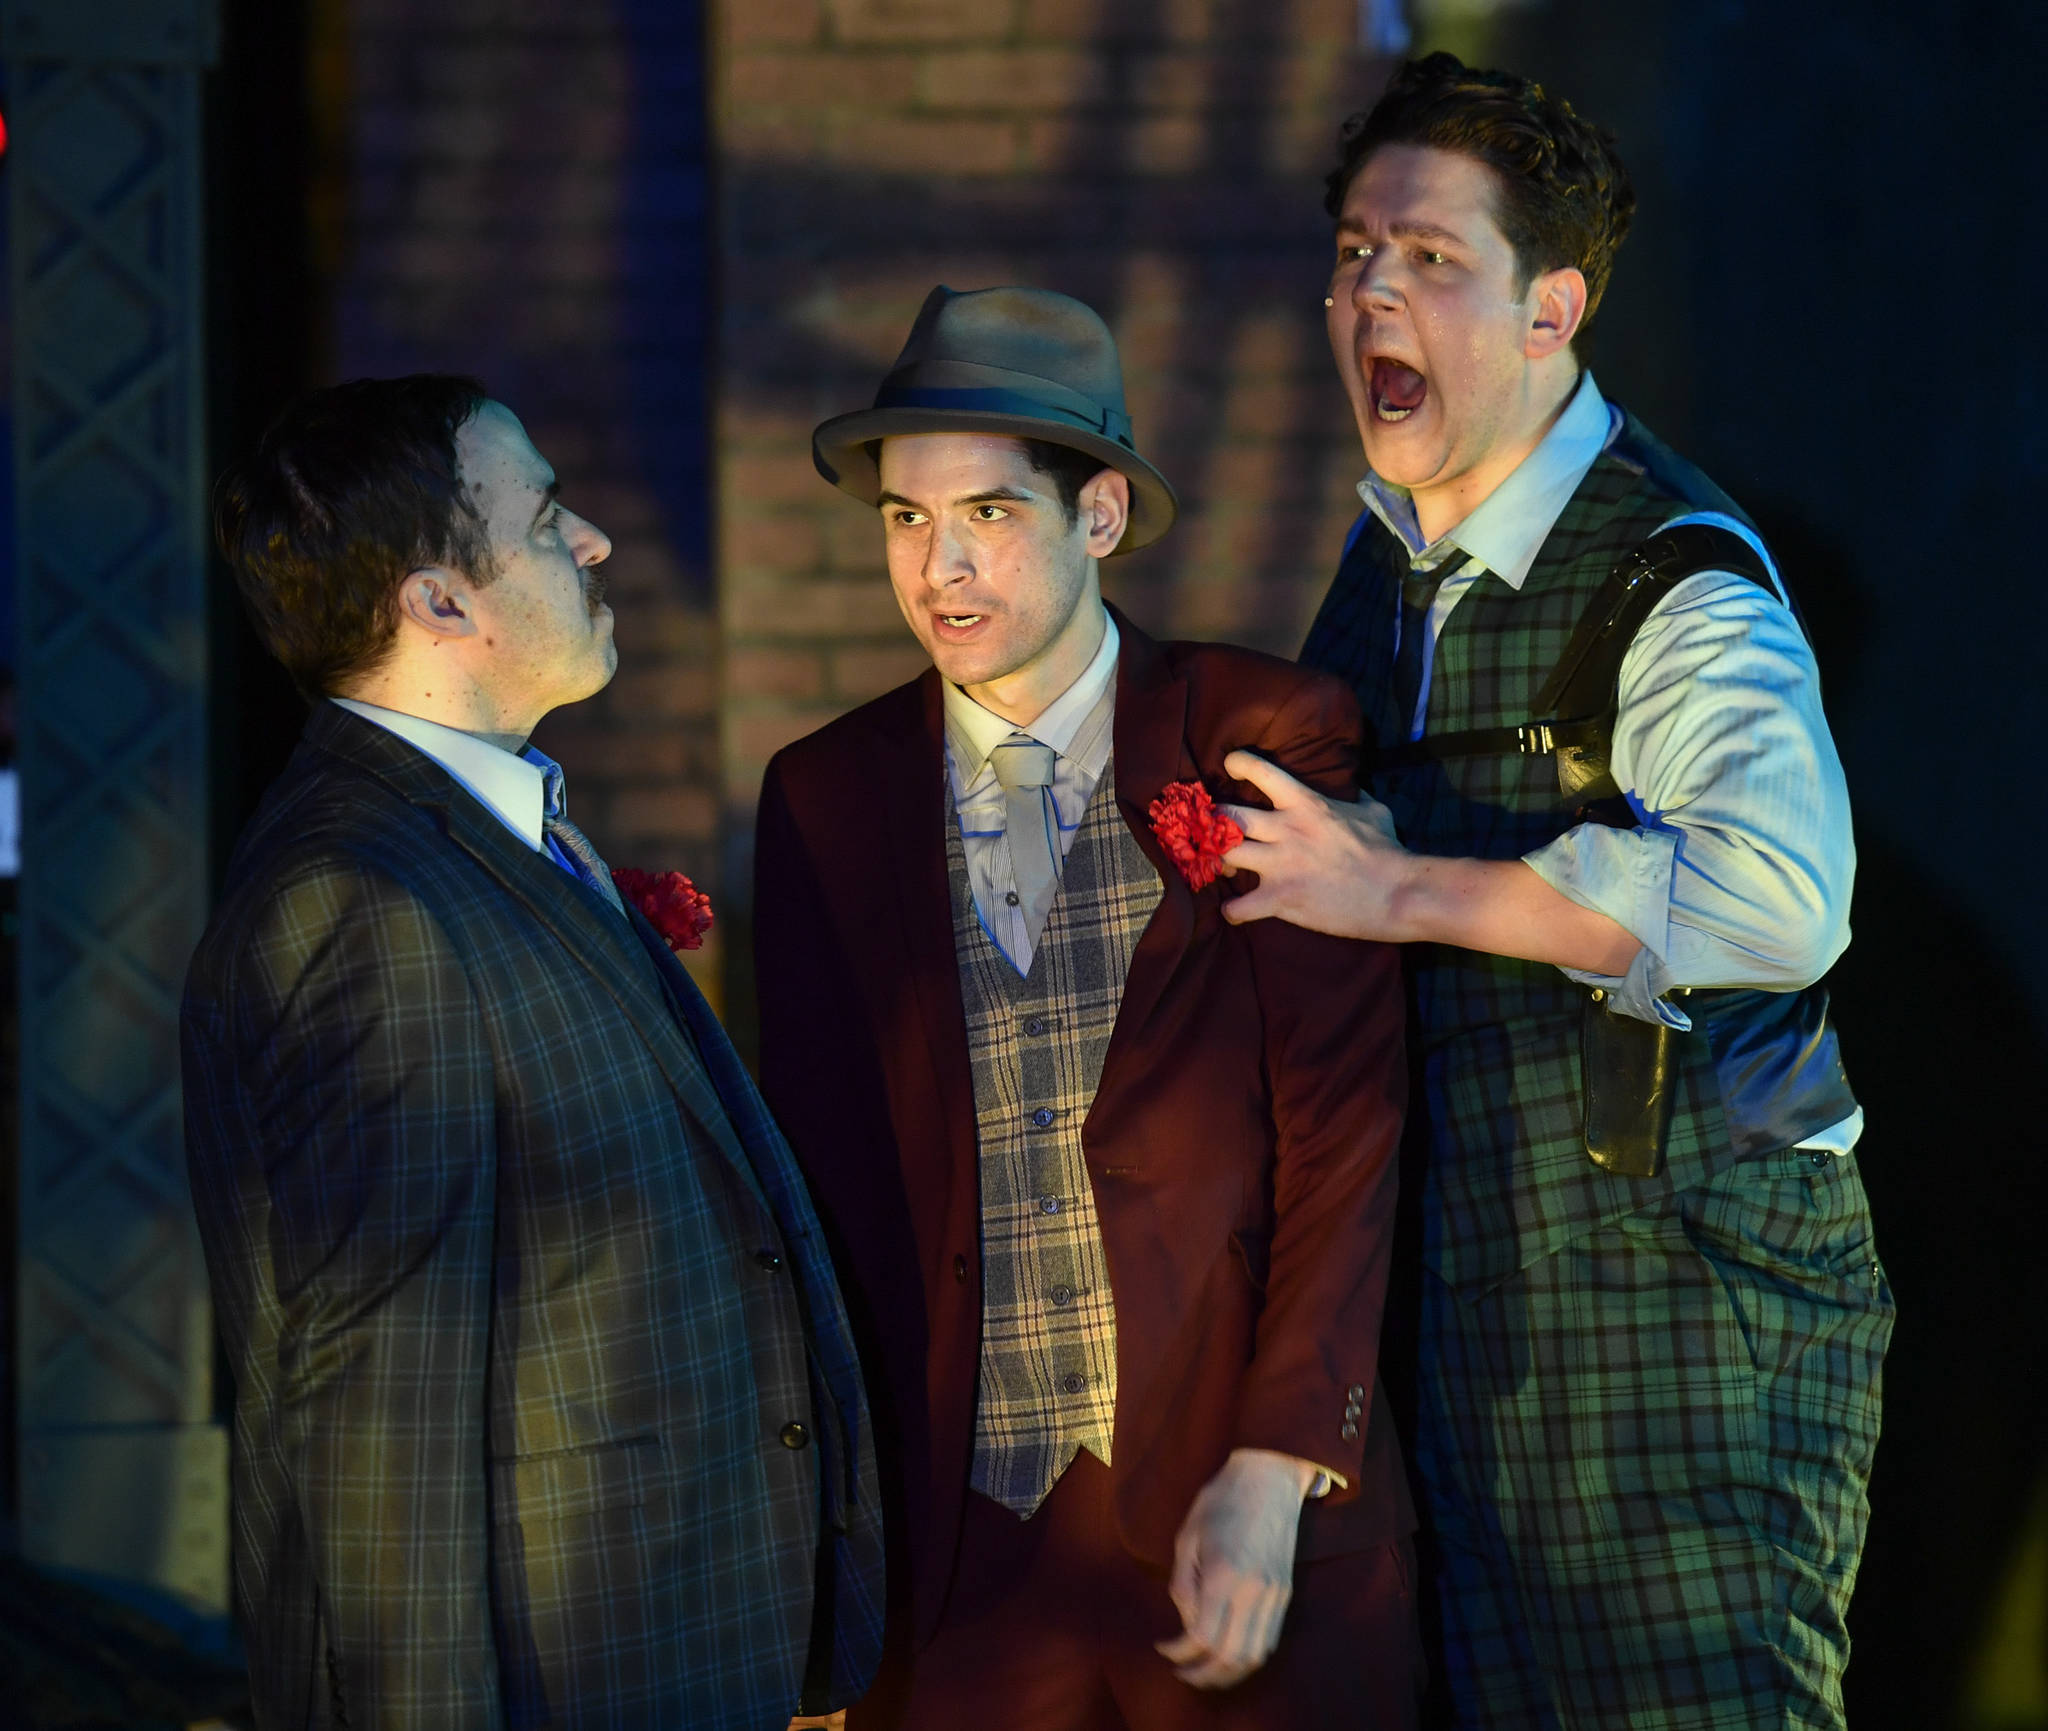 James Sullivan, left, as Nathan Detroit faces some heat from Felix Thillet, middle, as Harry the Horse and Evan Carson, right, as Big Jule during a performance of “Guys and Dolls” at Perseverance Theatre on Thursday, March 14, 2019. (Michael Penn | Juneau Empire)